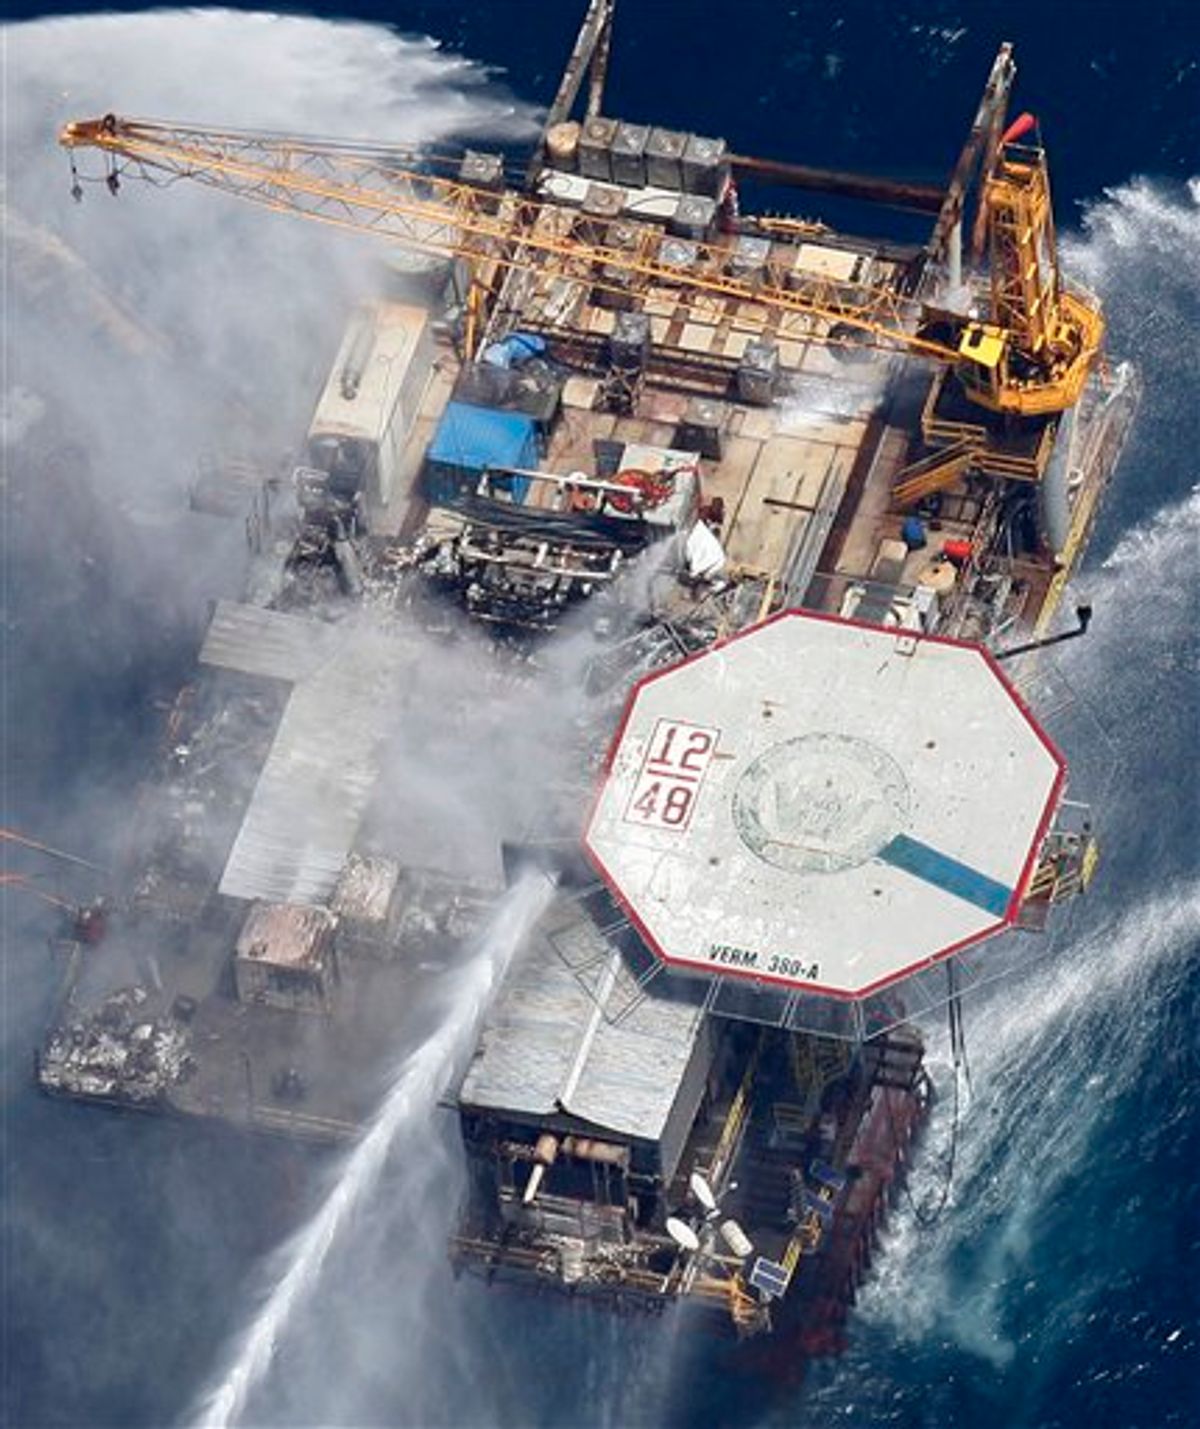 Boats are seen spraying water on an oil and gas platform that exploded in the Gulf of Mexico, of the coast of Louisiana., Thursday, Sept. 2, 2010. All 13 crew members were rescued.  (AP Photo/Gerald Herbert) (AP)